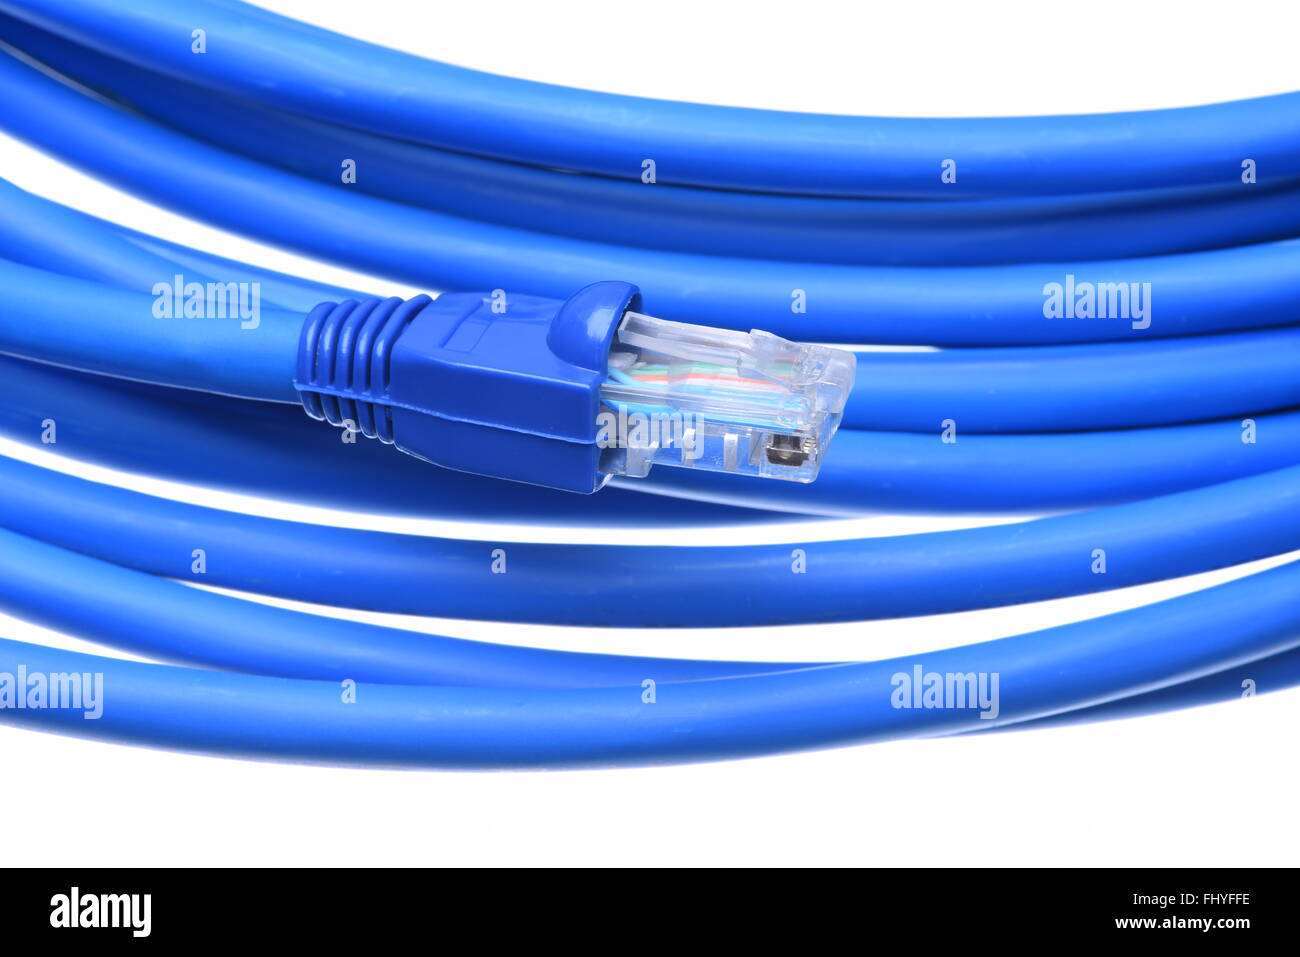 Blue computer network cable with plug isolated on white background Stock Photo